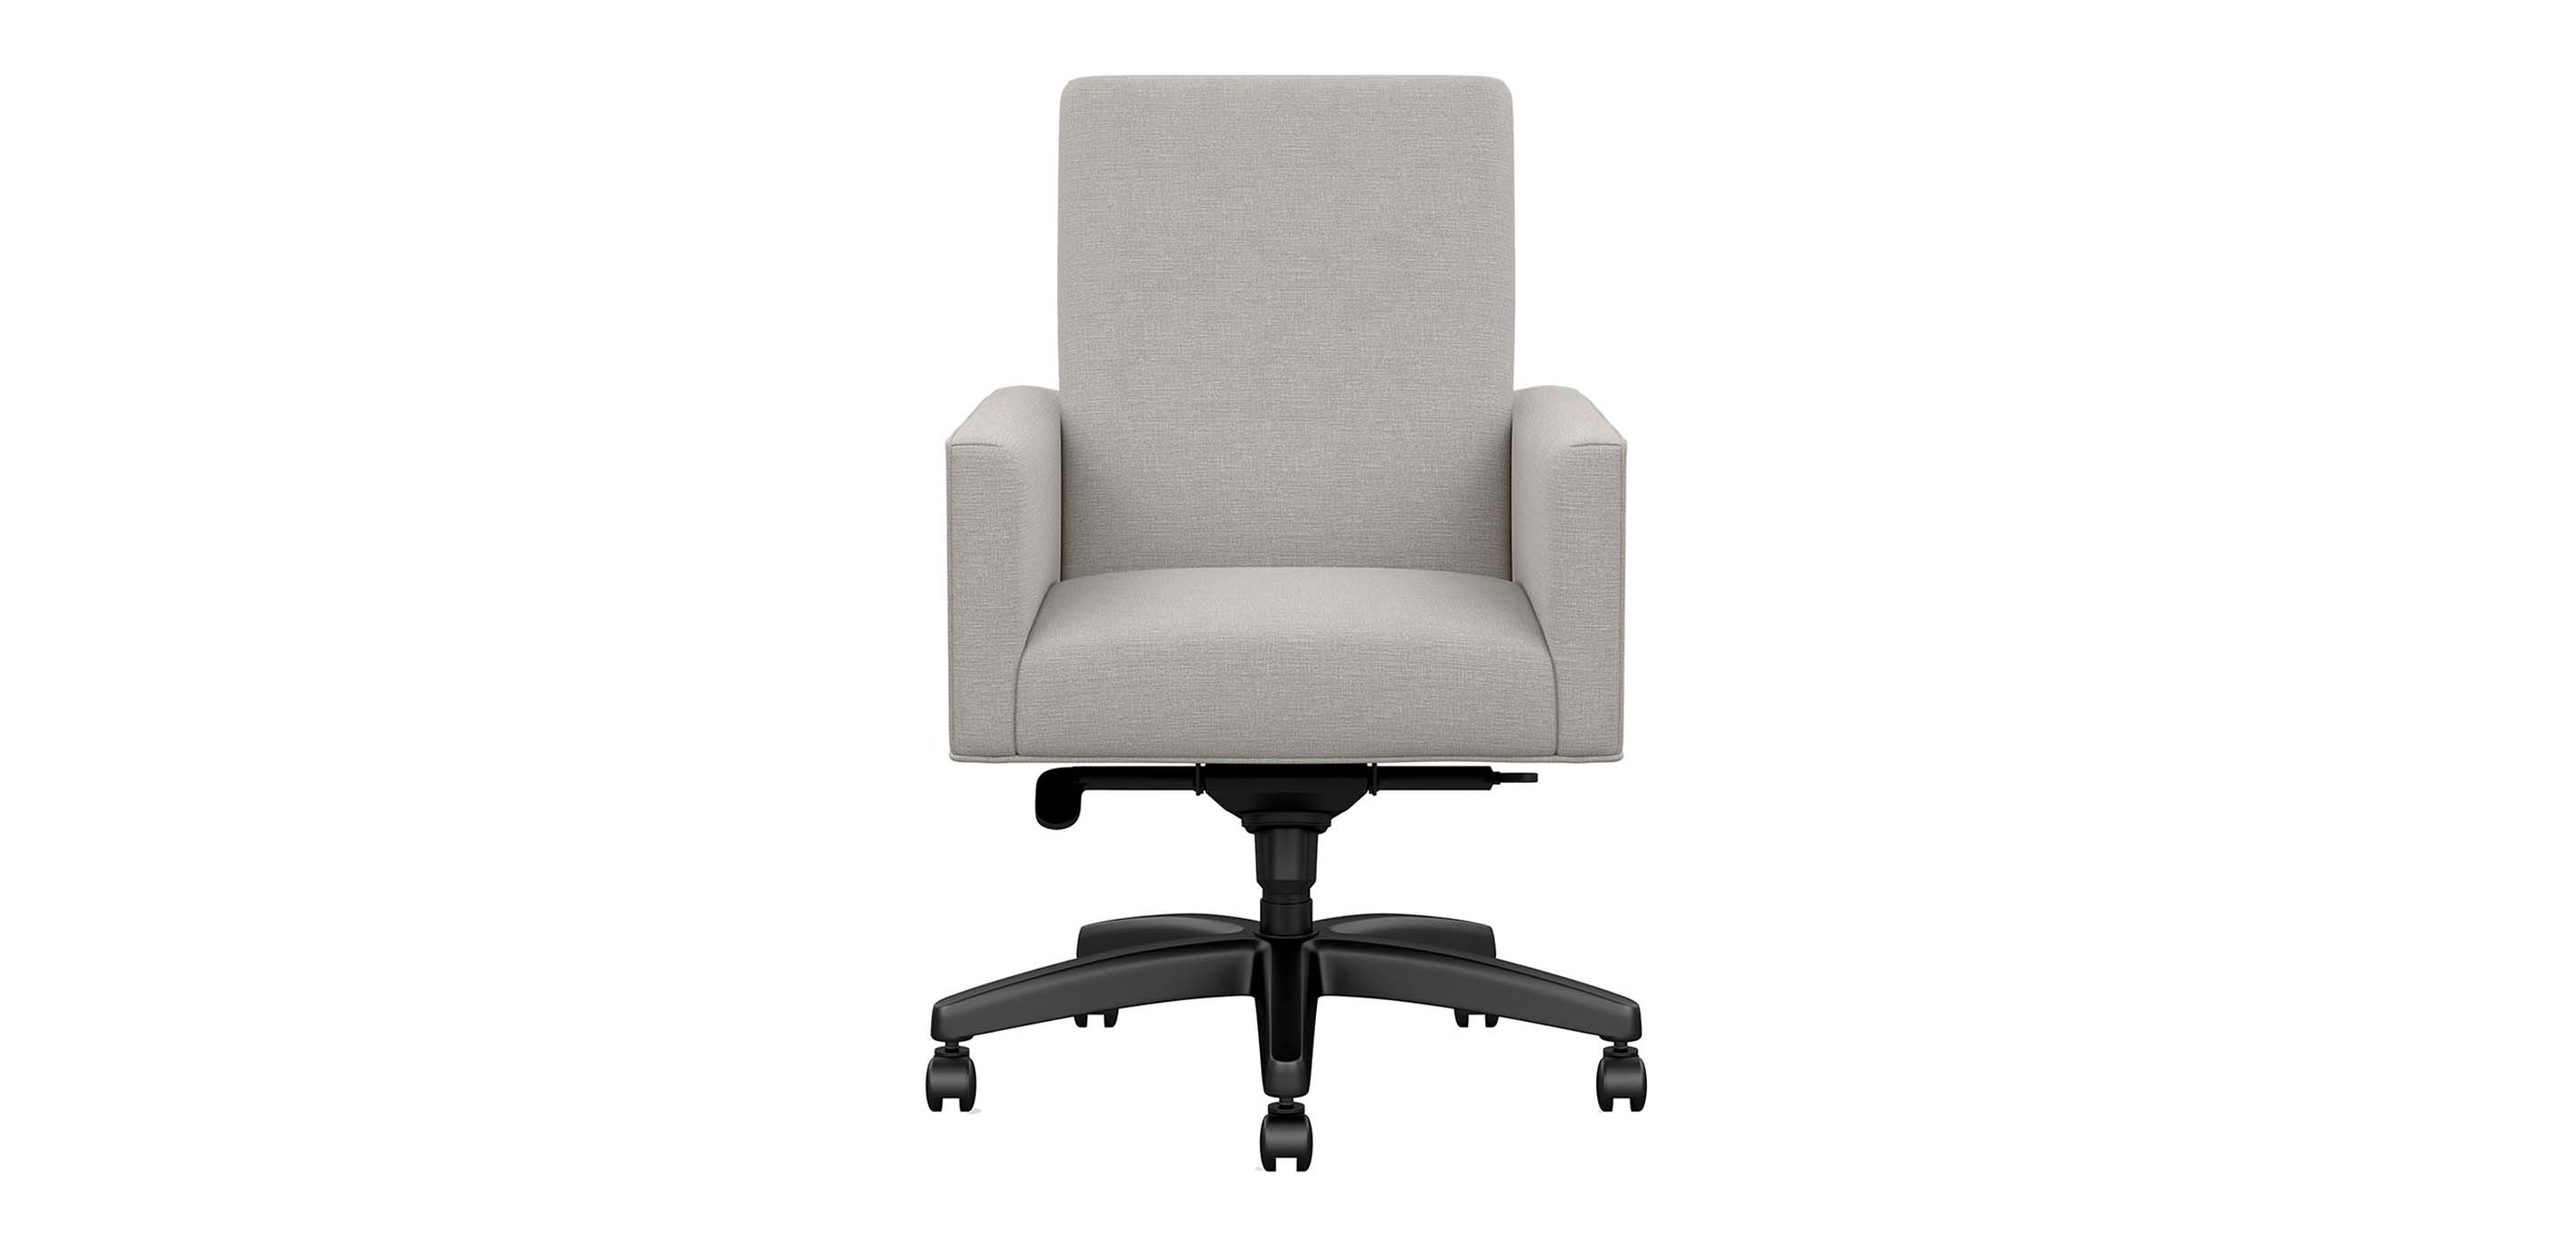 Upholstered Desk Chair | Desk Chair with Arms | Ethan Allen